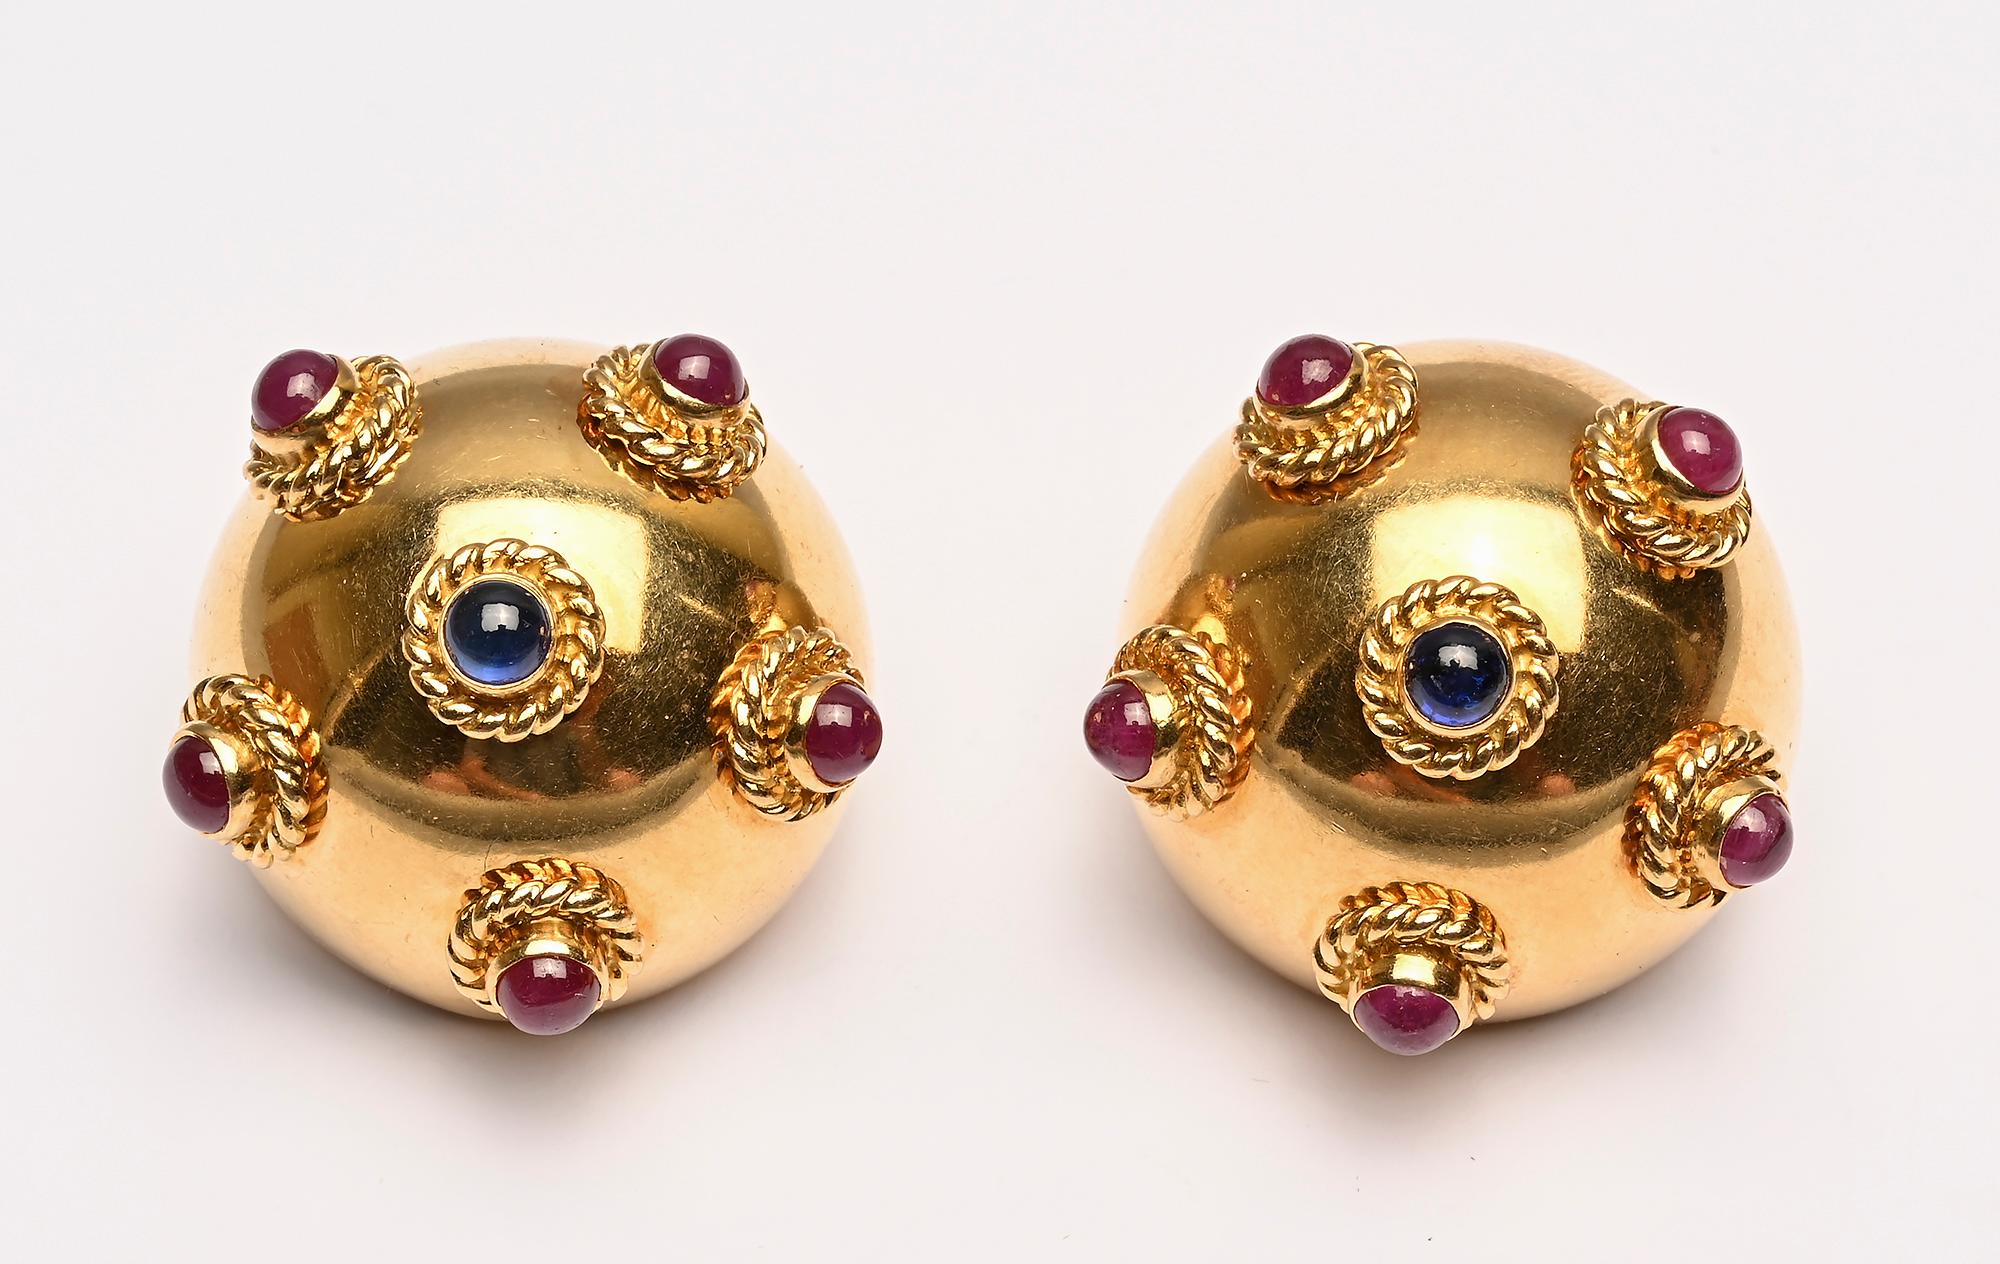 Eighteen karat gold domed earrings centered with a cabochon sapphire and each surrounded by 5 rubies. All of the stones are set in collar bezels surrounded by twisted god. 
Clip backs can be converted to posts. The earrings are 1 1/16